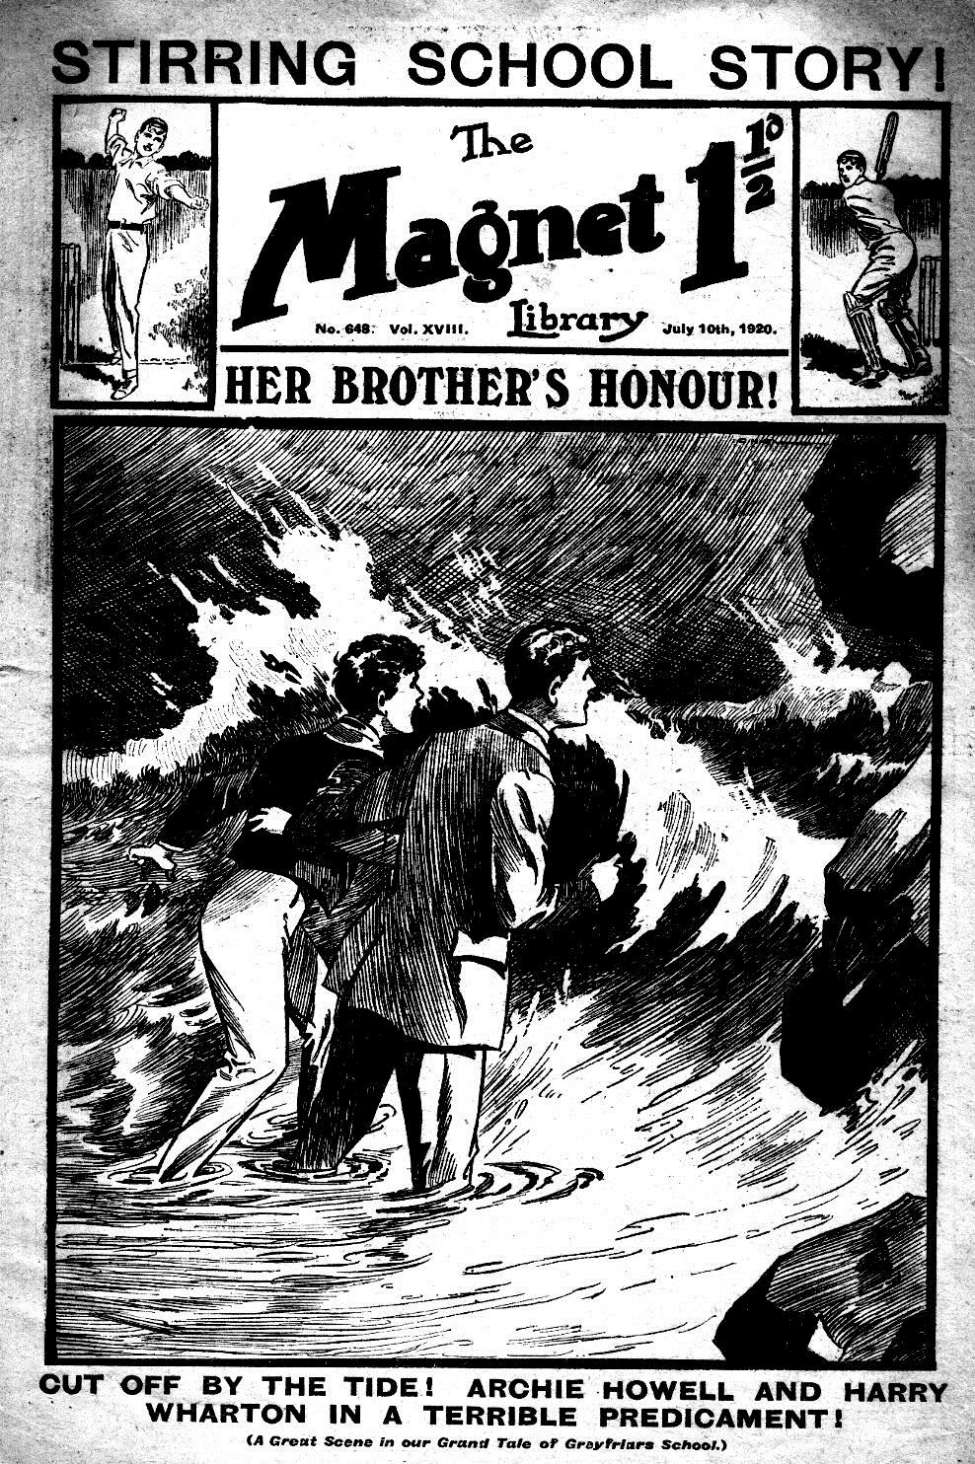 Book Cover For The Magnet 648 - Her Brother's Honour